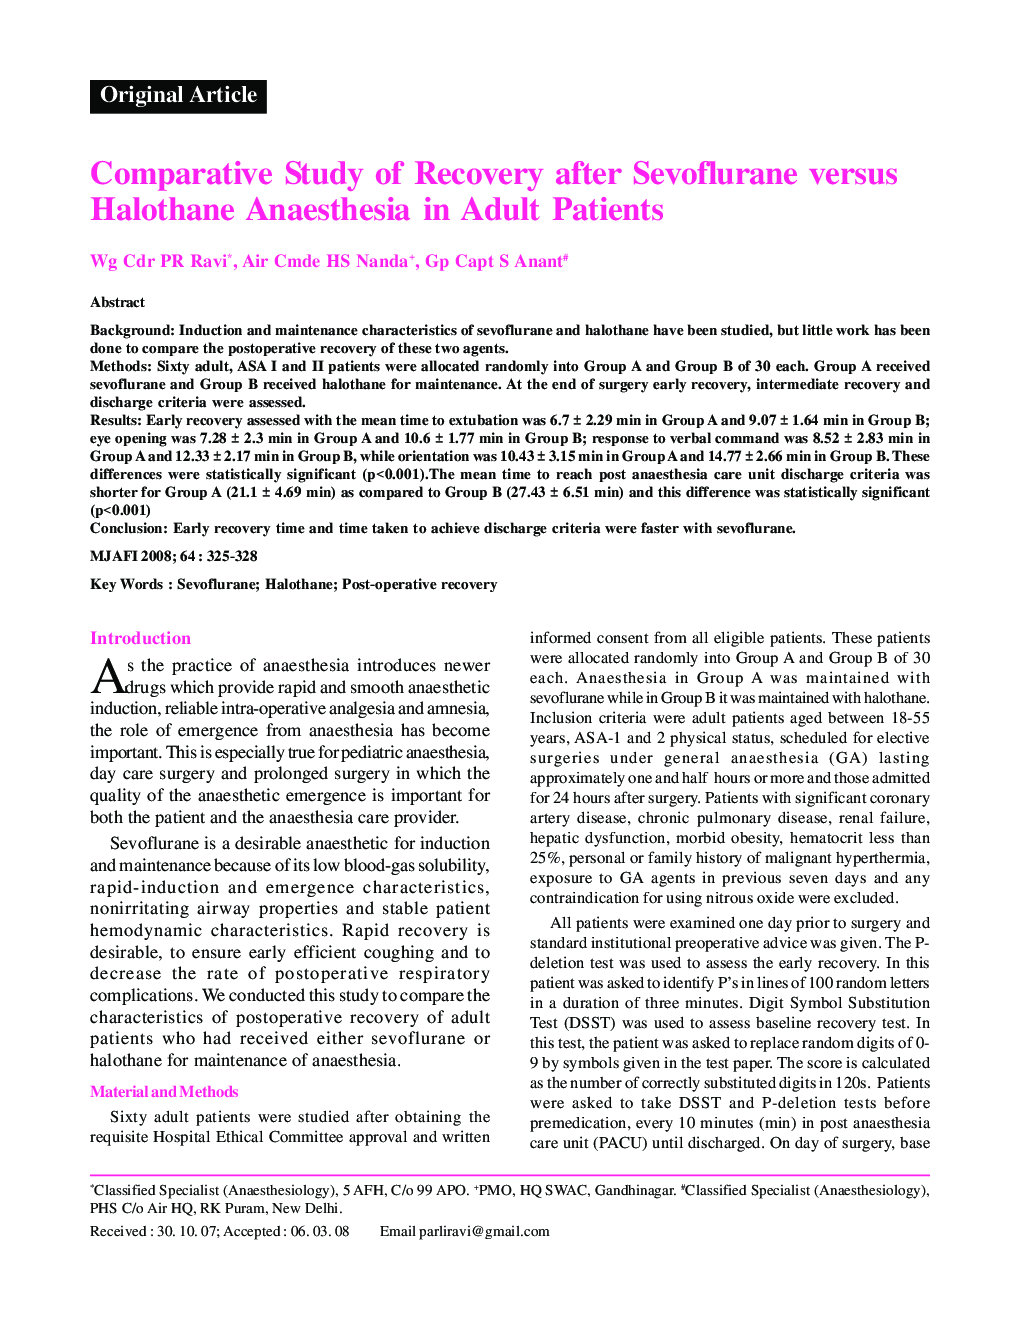 Comparative Study of Recovery after Sevoflurane versus Halothane Anaesthesia in Adult Patients